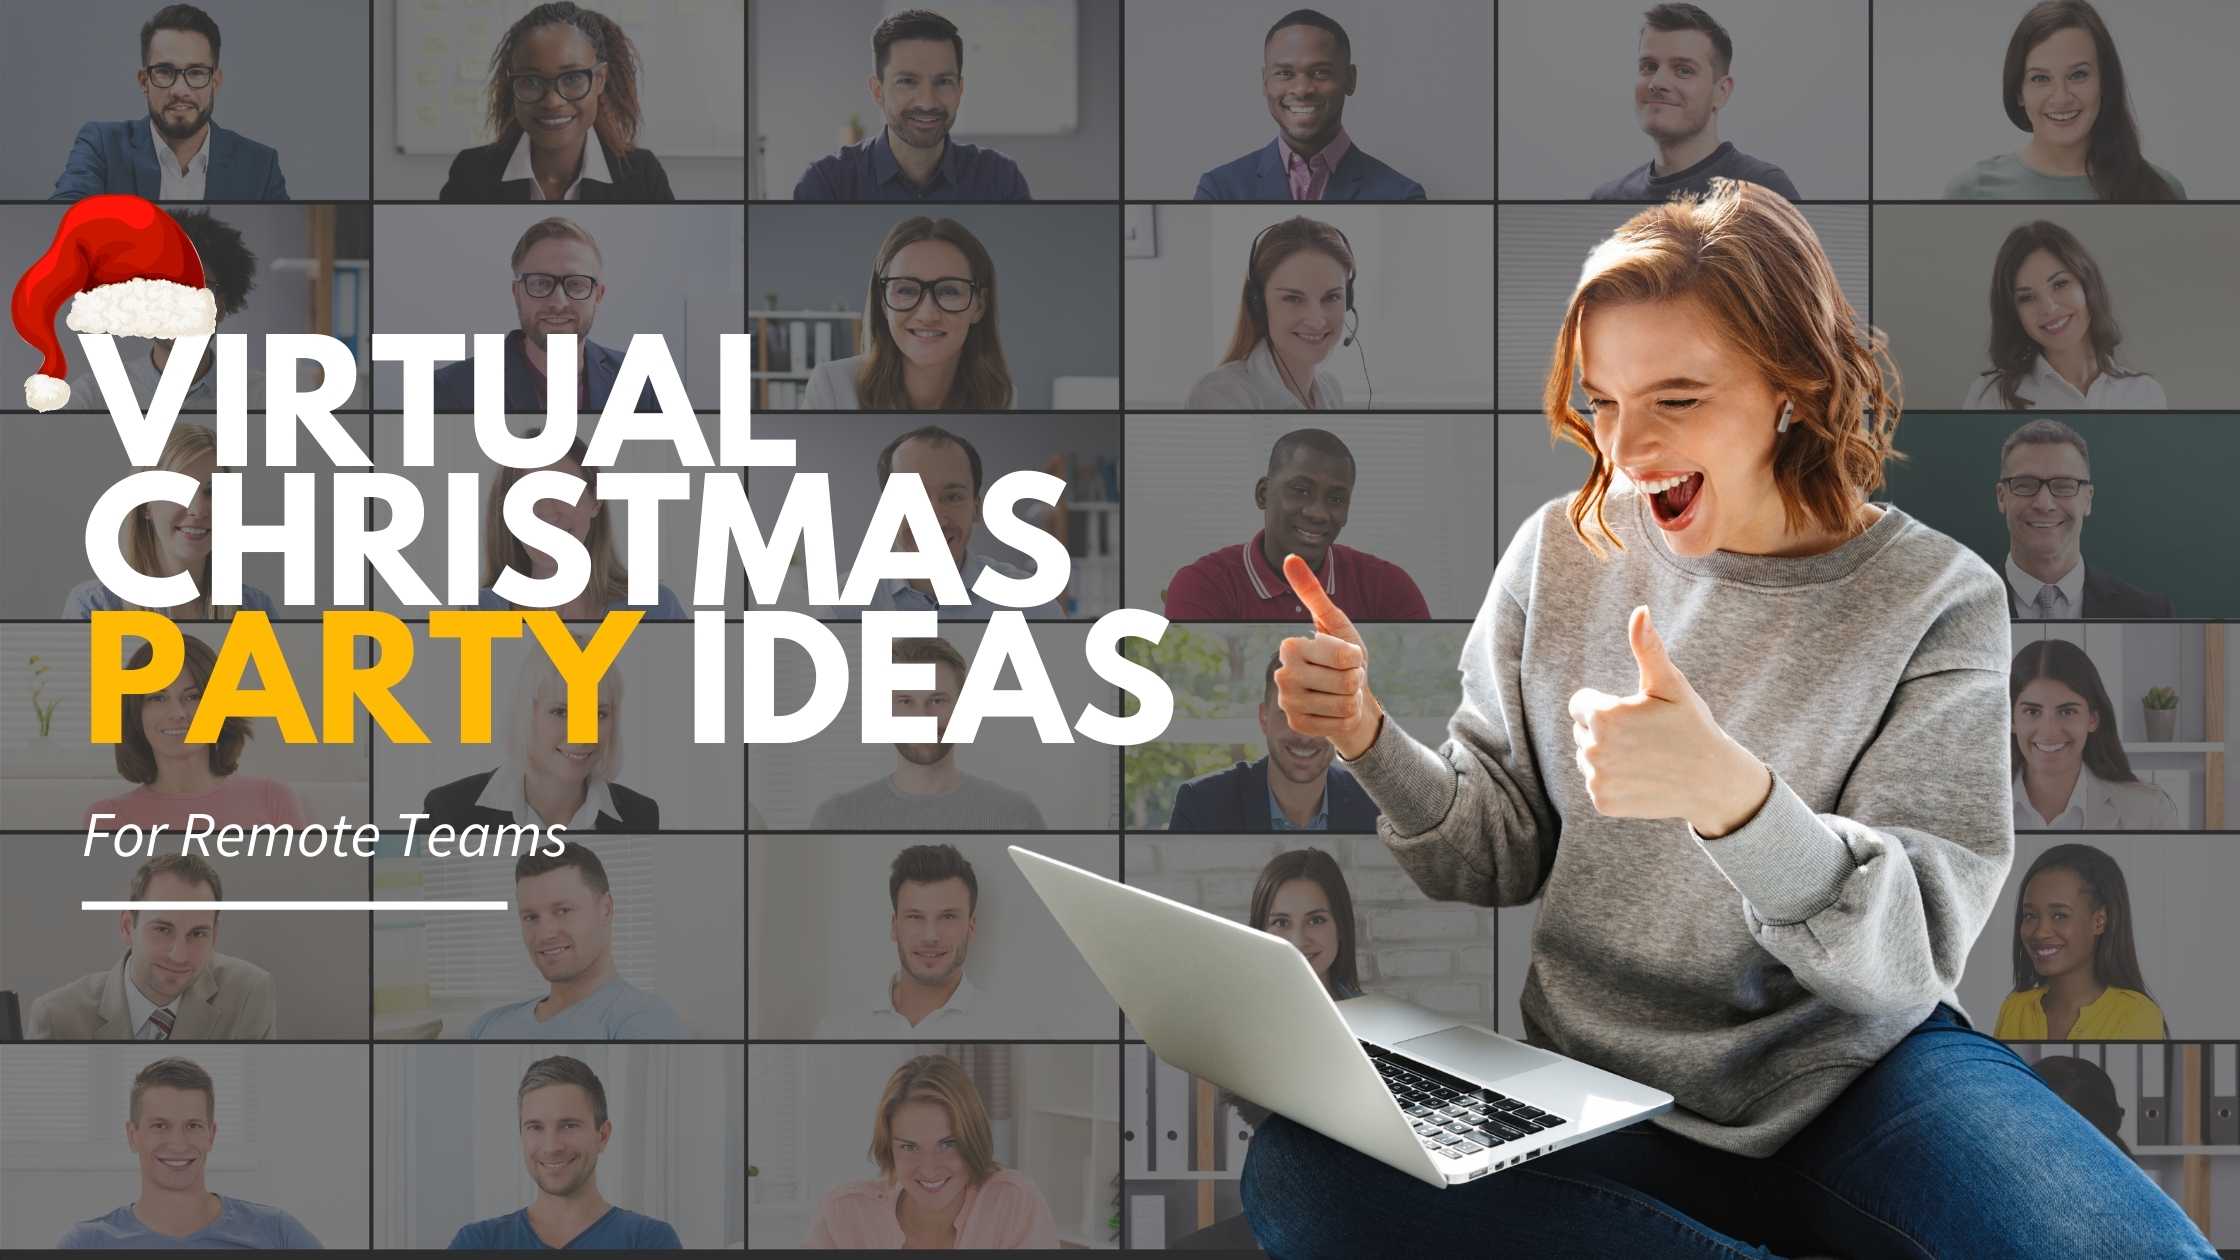 Merry e-Christmas! This company has just launched the most fun ...